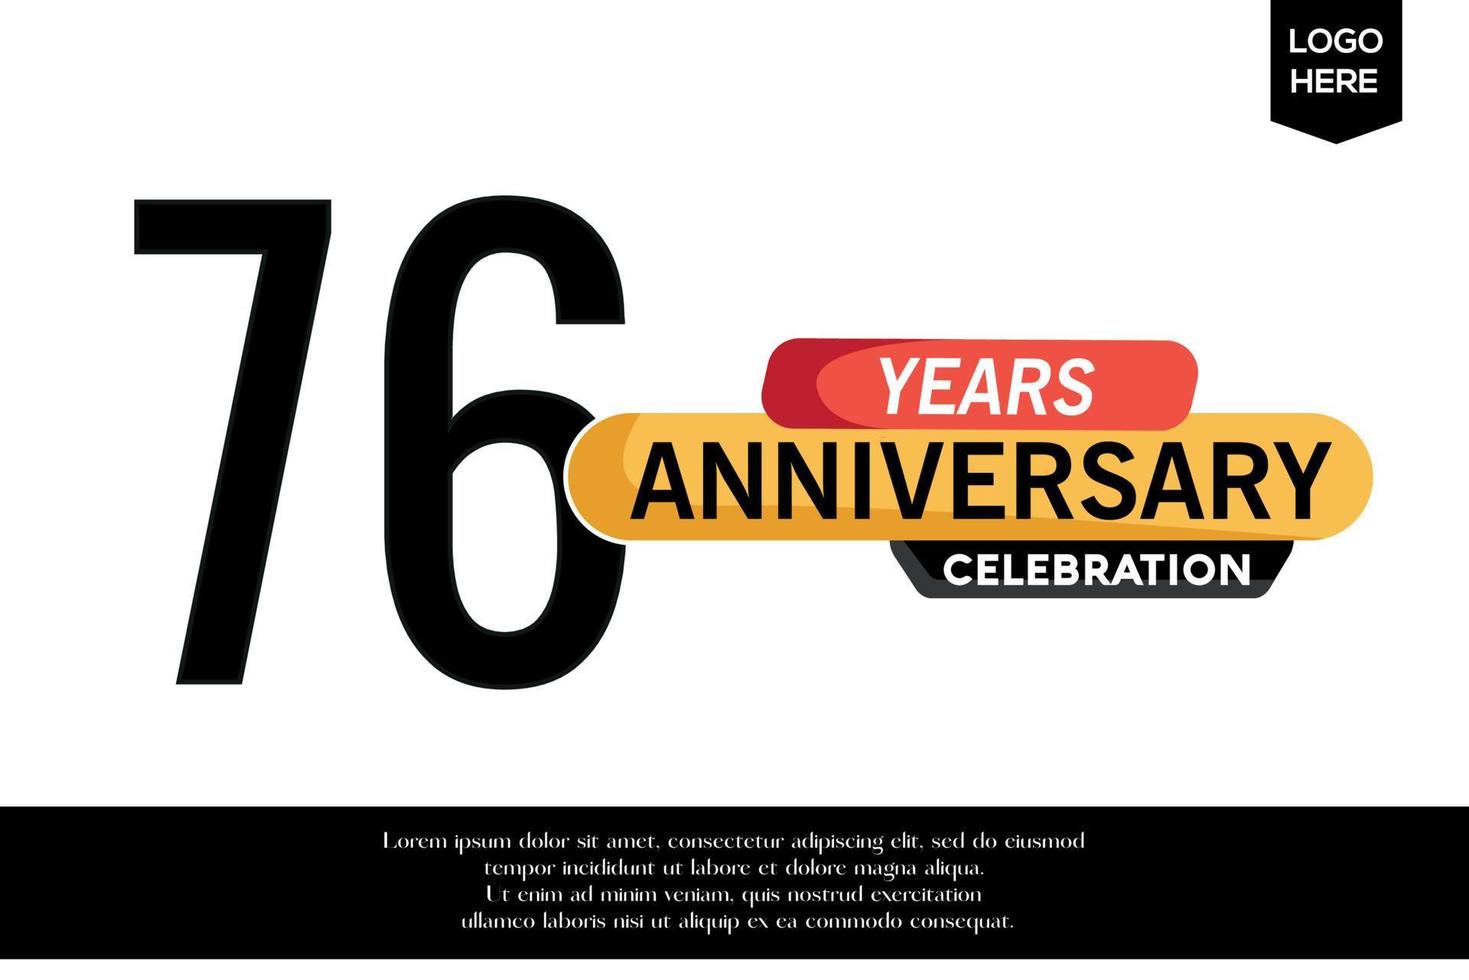 76th anniversary celebration logotype black yellow colored with text in gray color isolated on white background vector template design